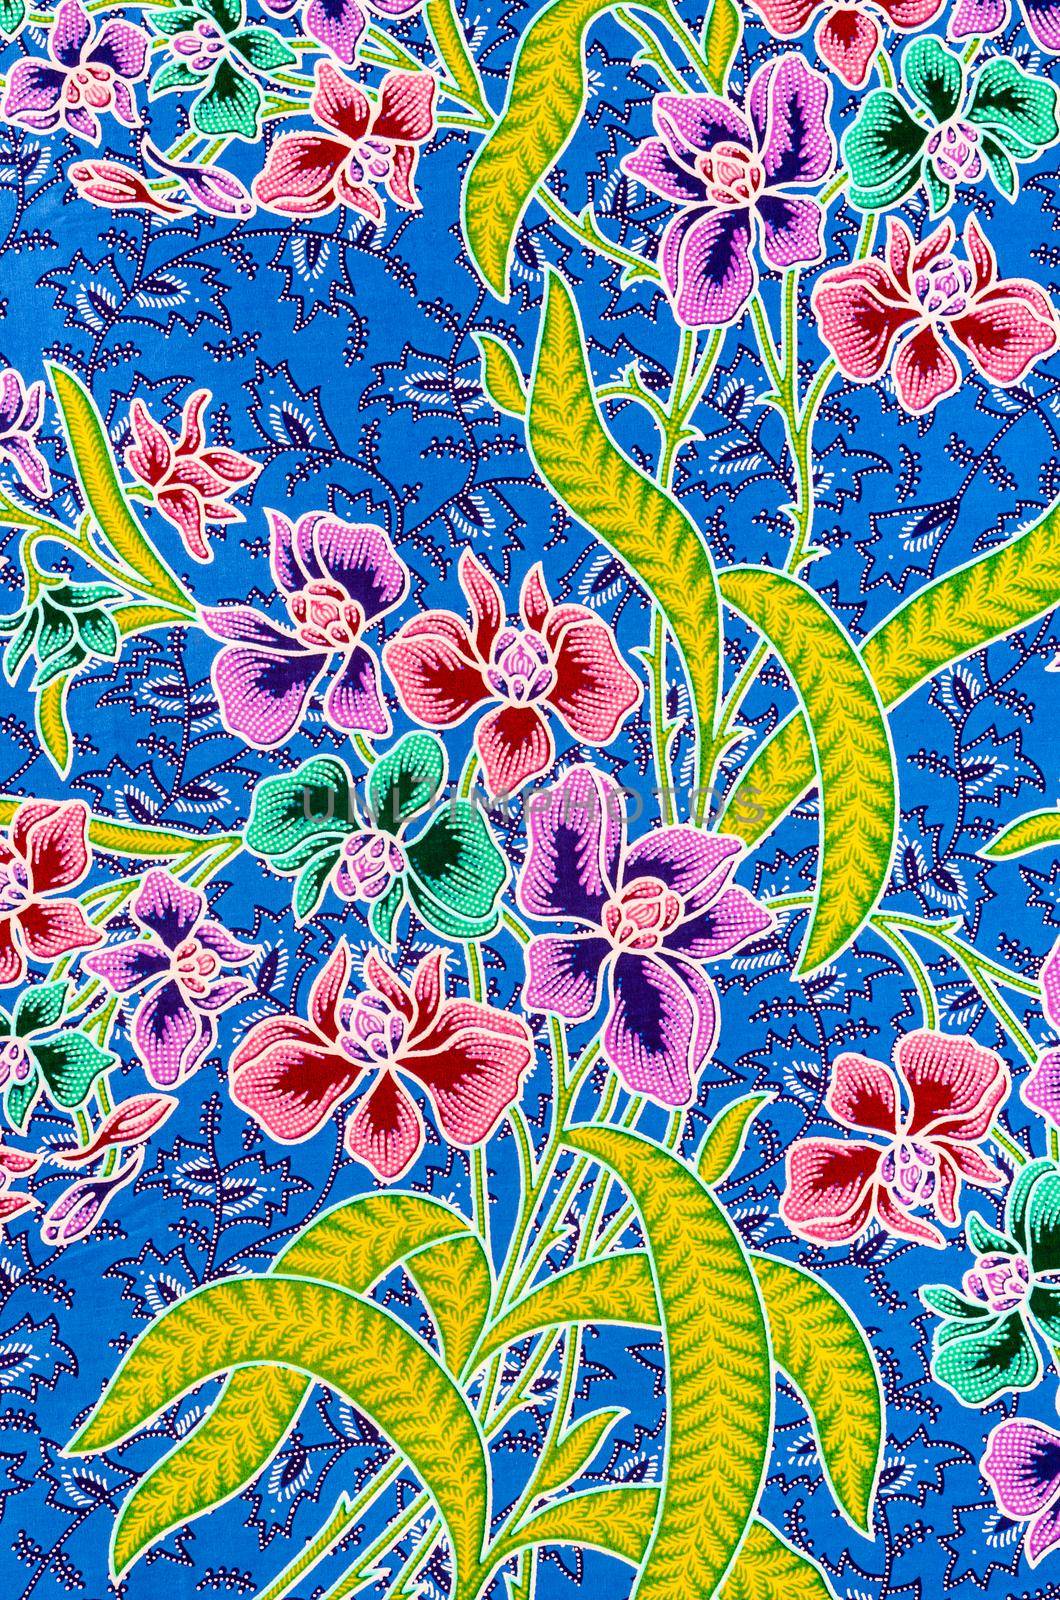 The beautiful of art Batik textile pattern that become traditional clothes.